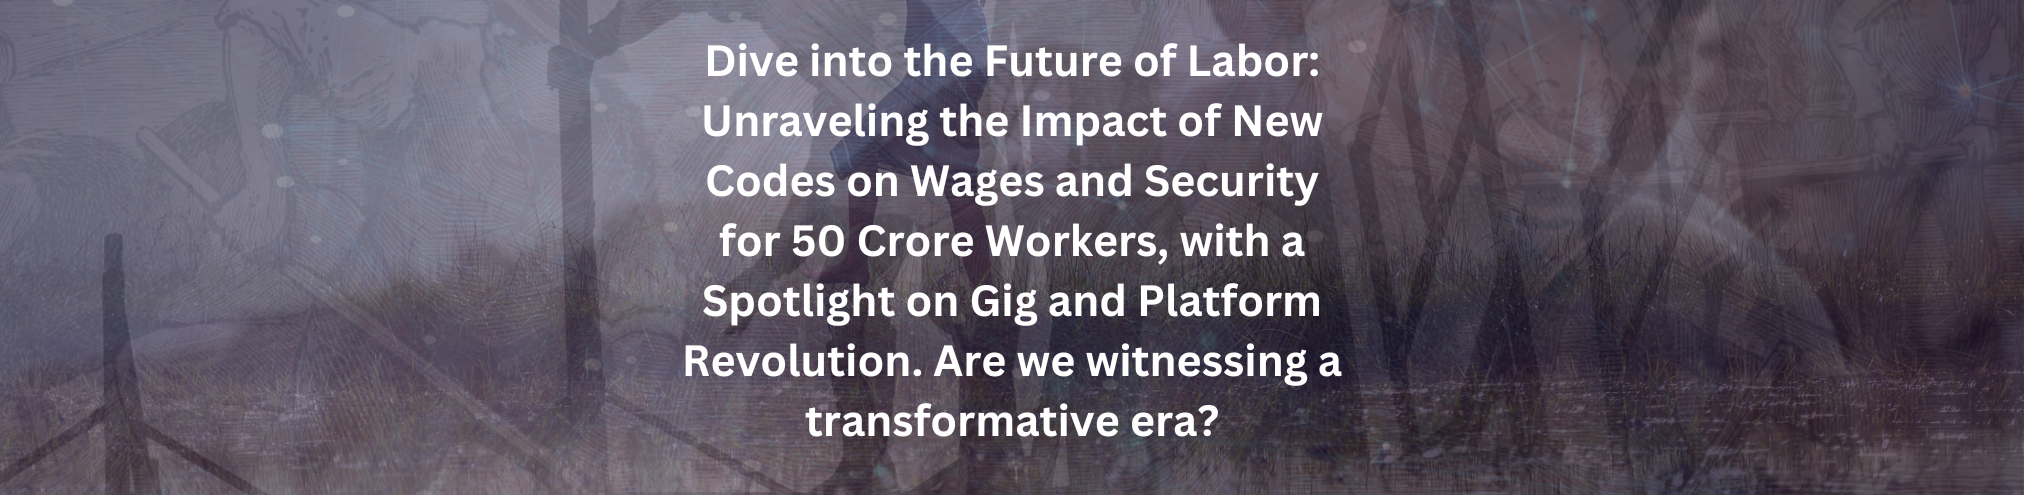 Will New Labour Codes Secure Wages and Social Security for 50 Crore Workers, Including Gig and Platform Workers